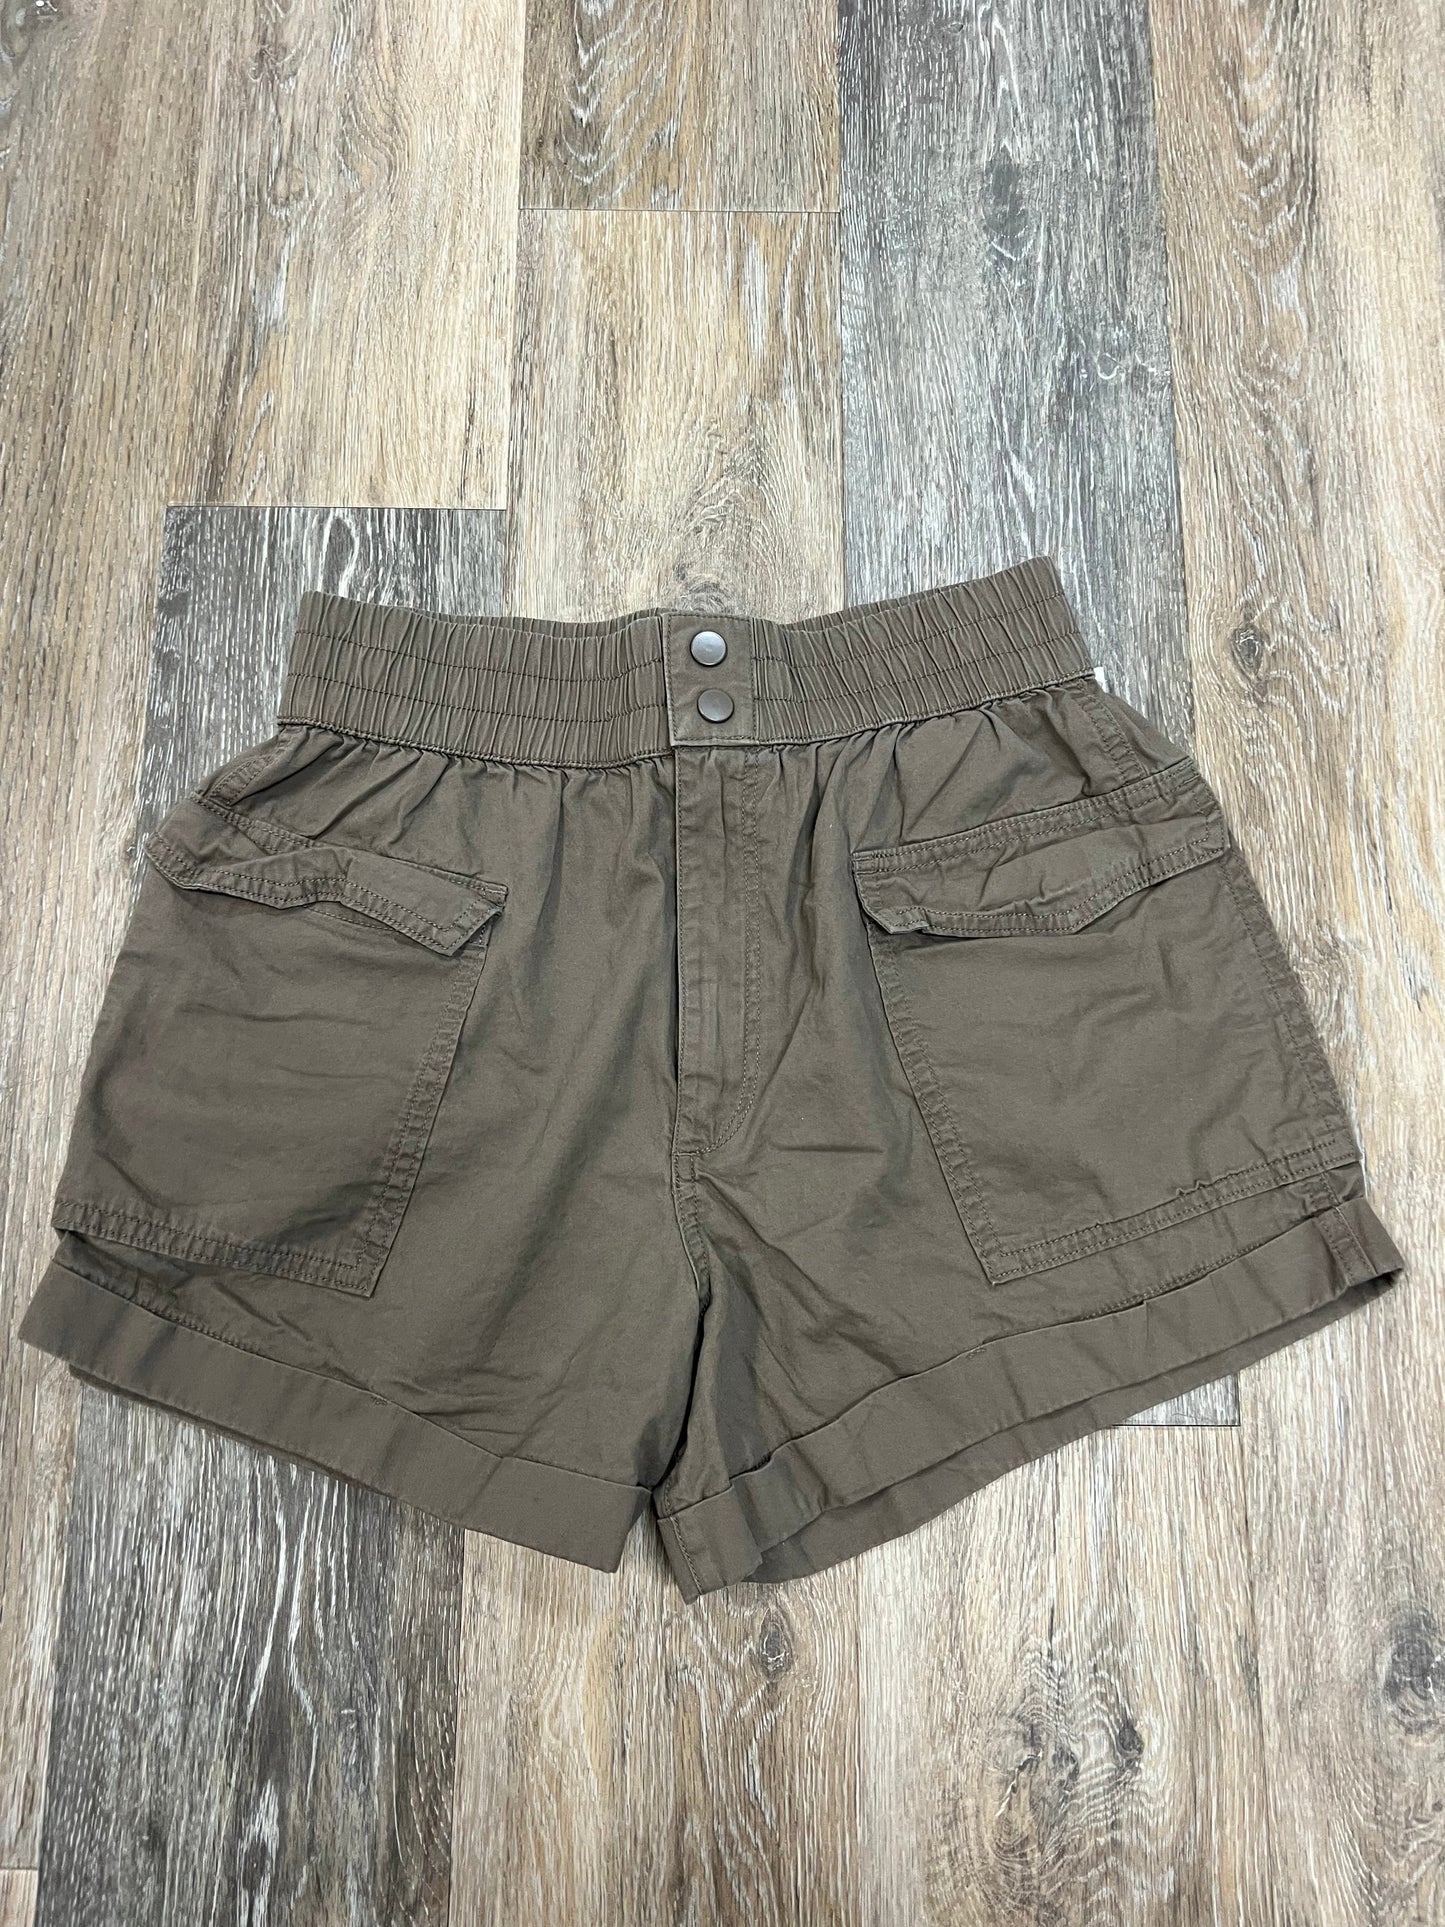 Brown Shorts Abercrombie And Fitch, Size S